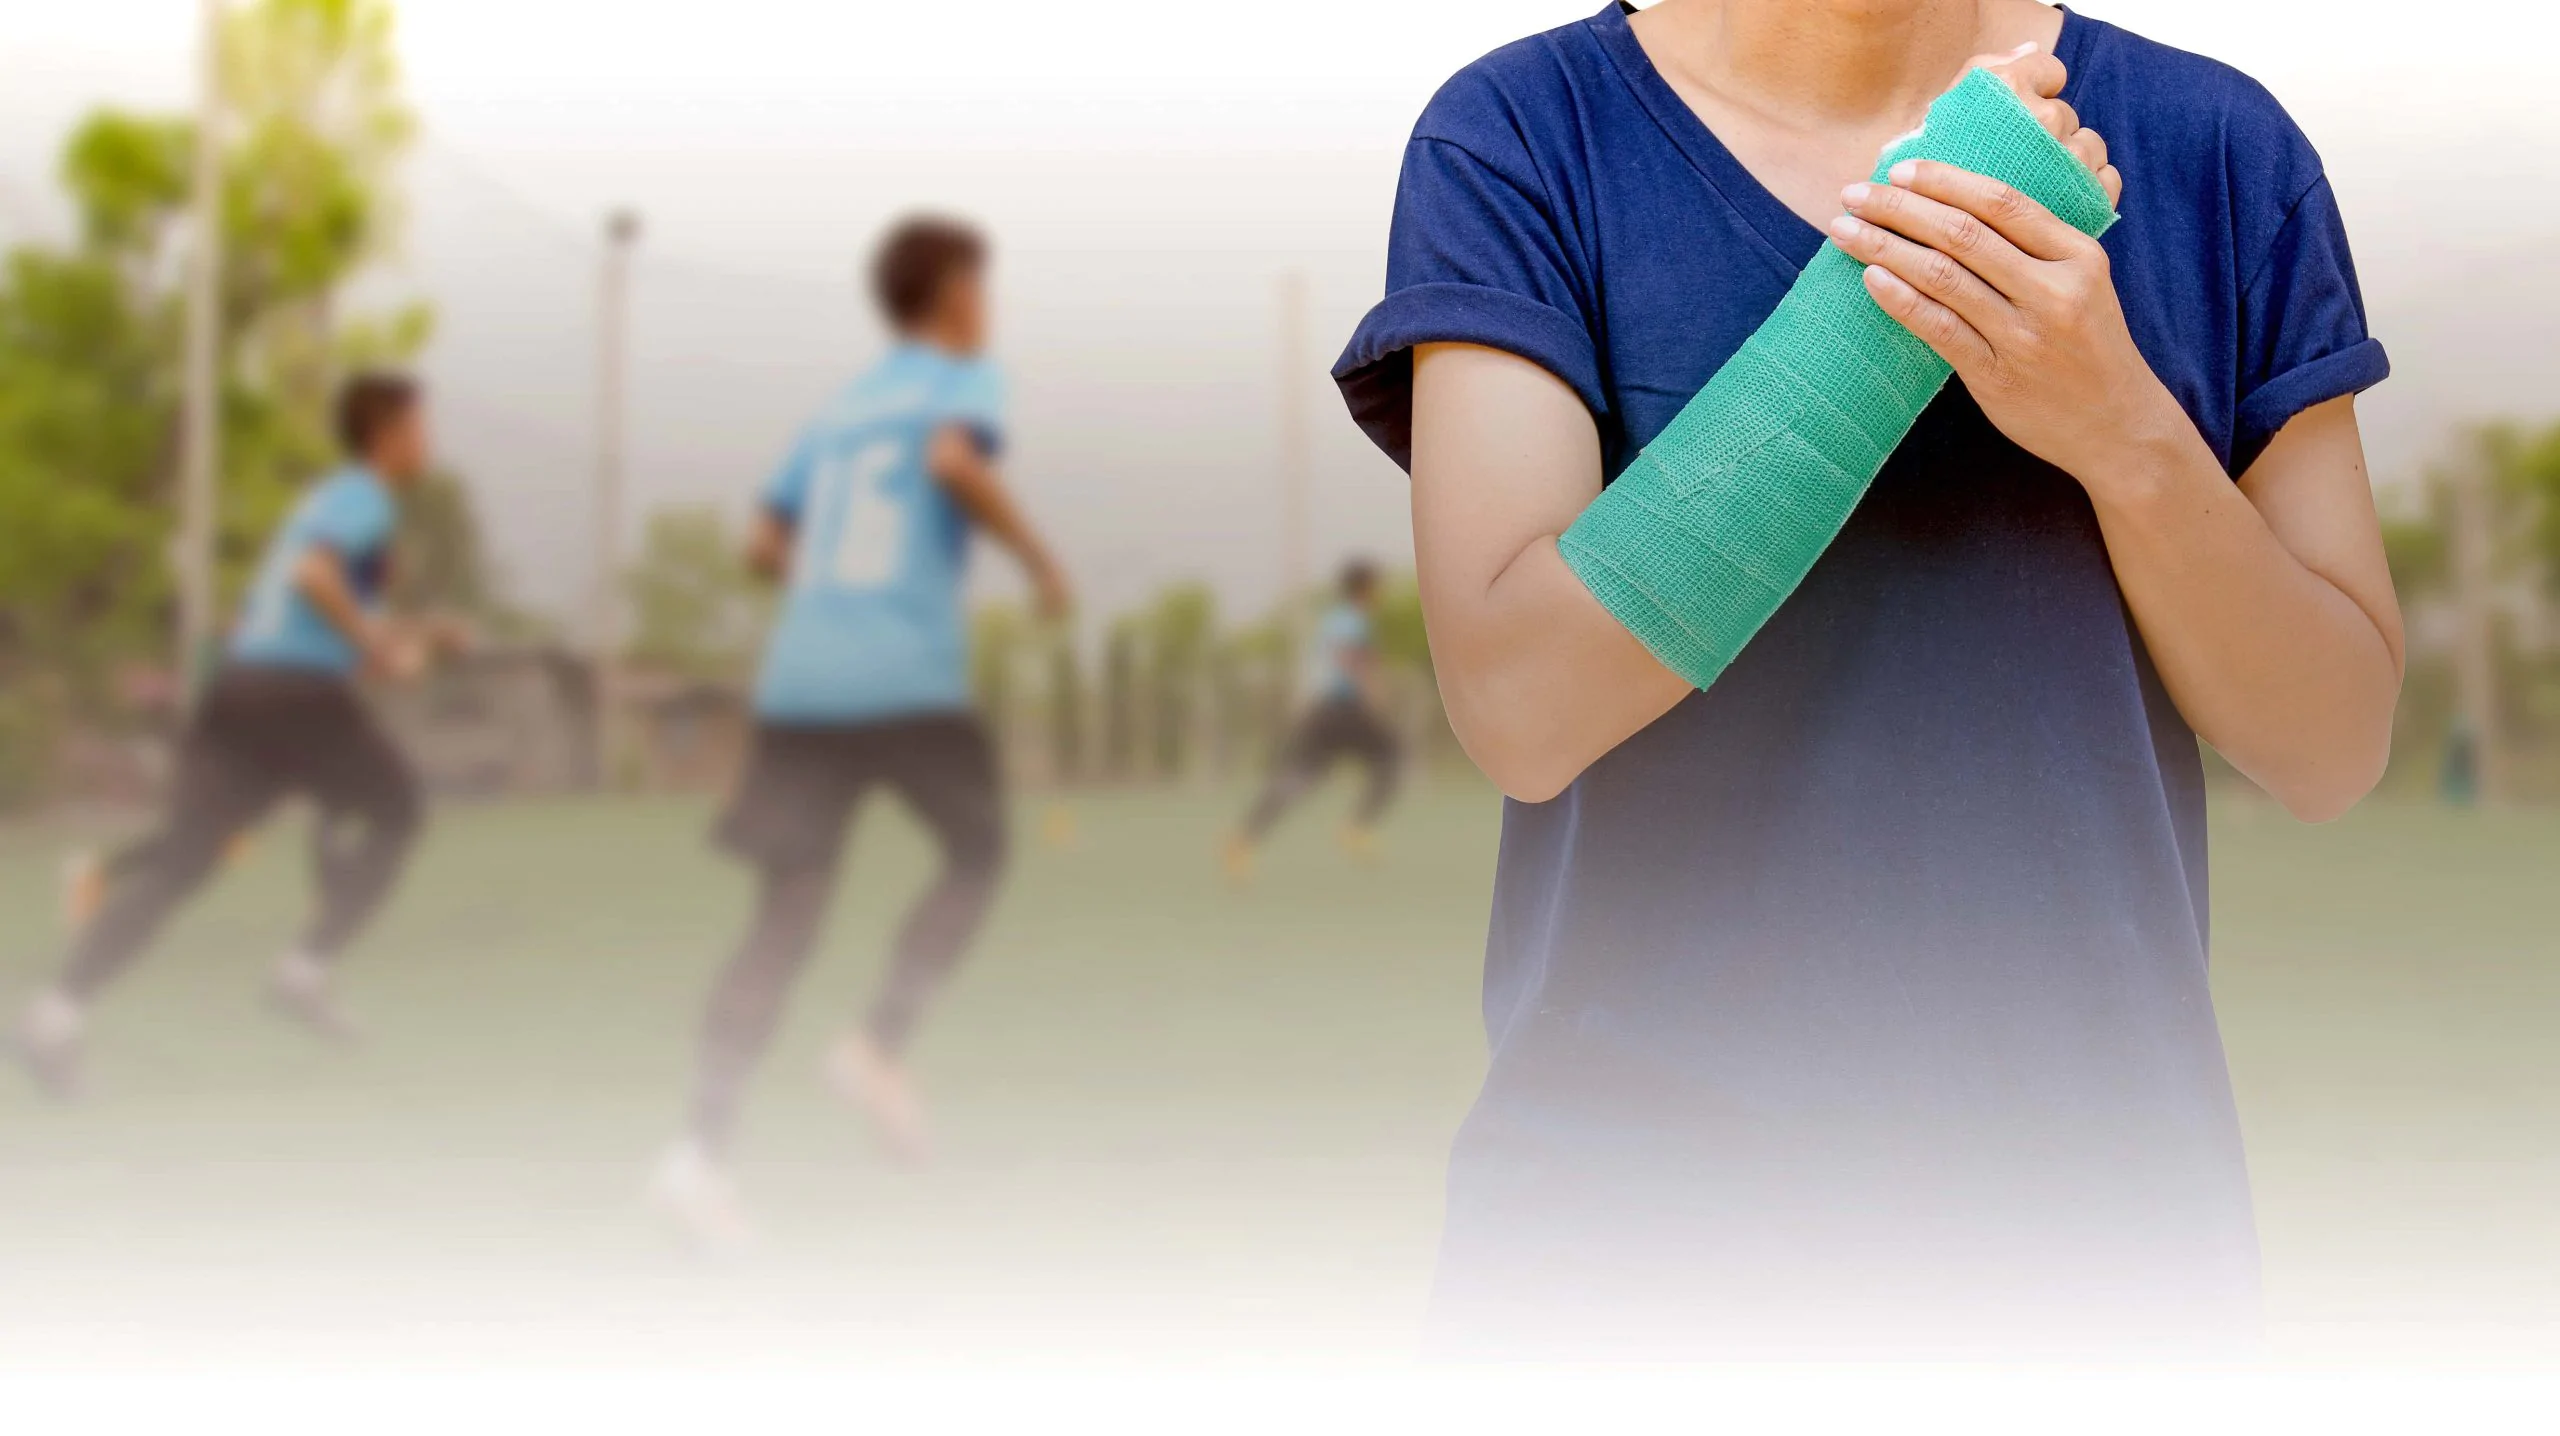 Filing a Child Sports Injury Lawsuit in New York